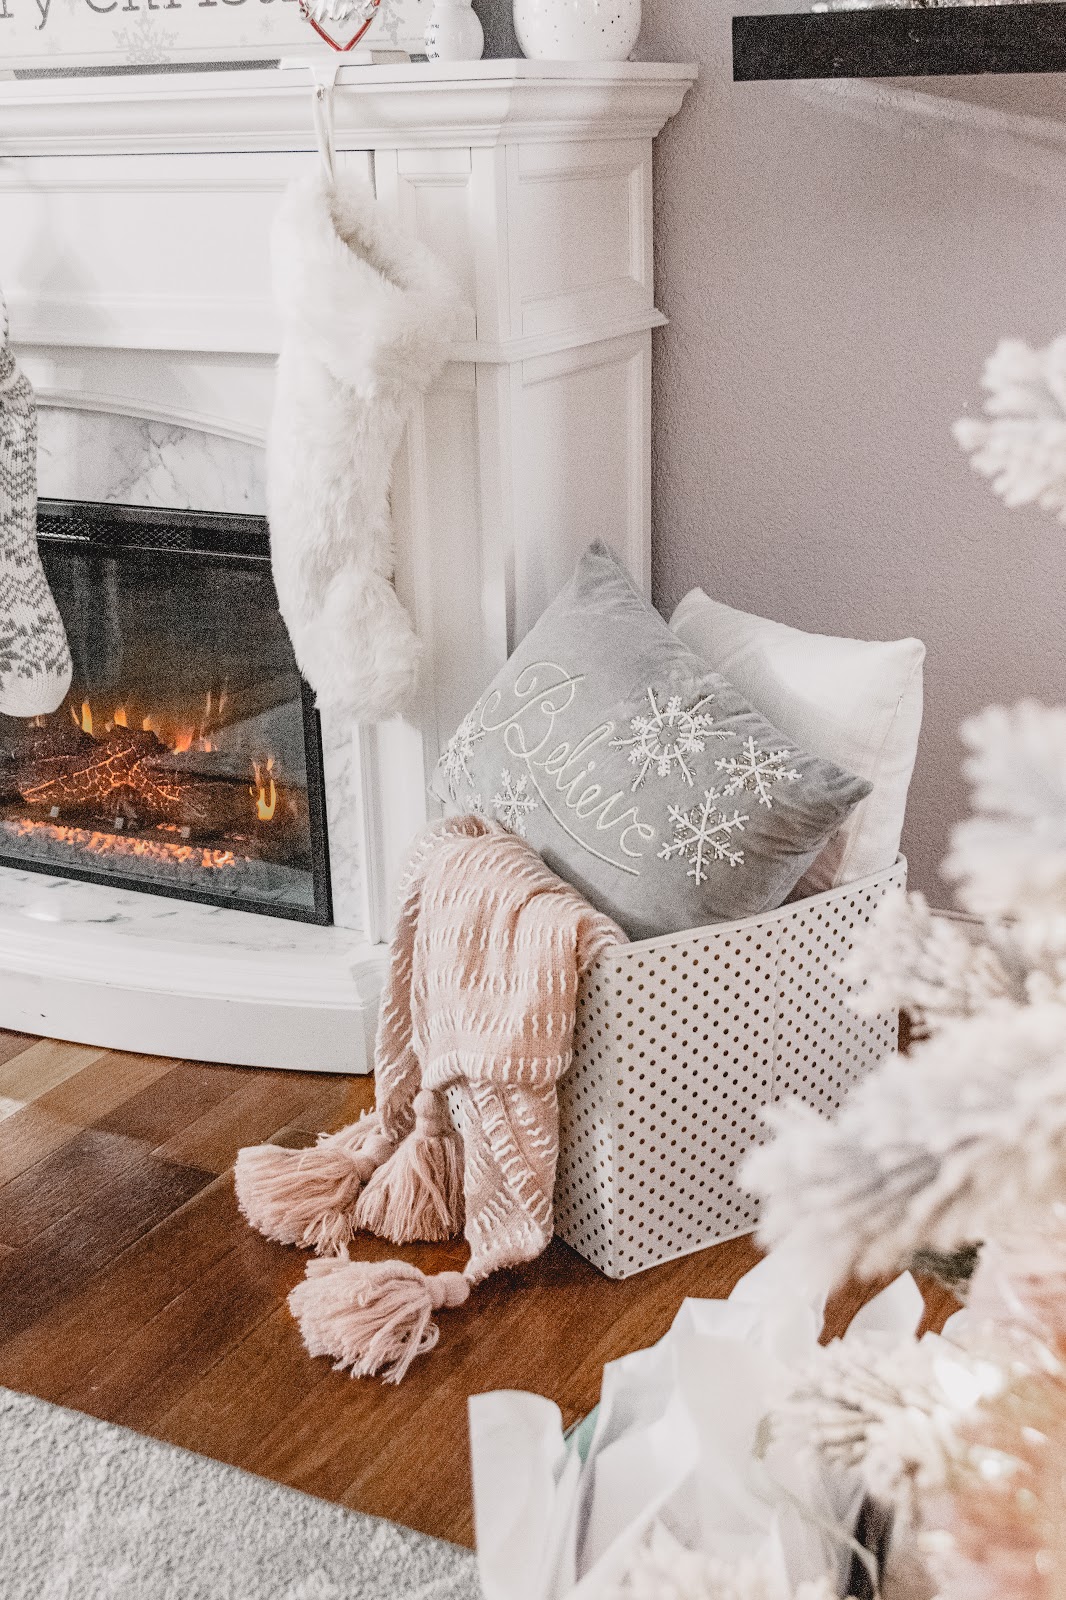 Holiday Giving to St. Jude with Gordmans  Christmas Decor Mantle Decor Holiday Gift Ideas Blush White Gray Fireplace Believe Pillow Blanket Cone Trees Silver and Gold Cozy Stockings Fur Stockings Knit Stockings